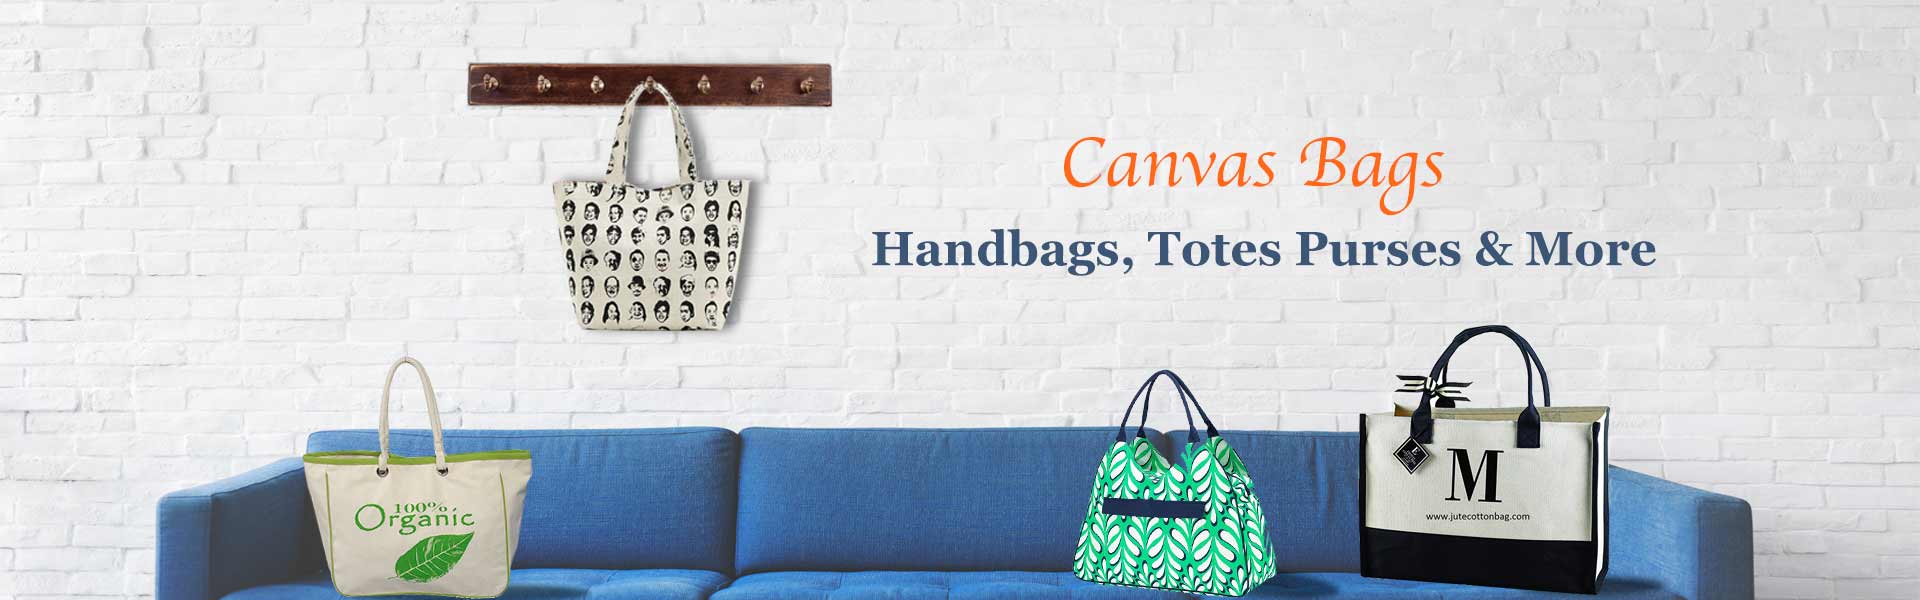 Wholesale Canvas Bags Supplier in Jacksonville